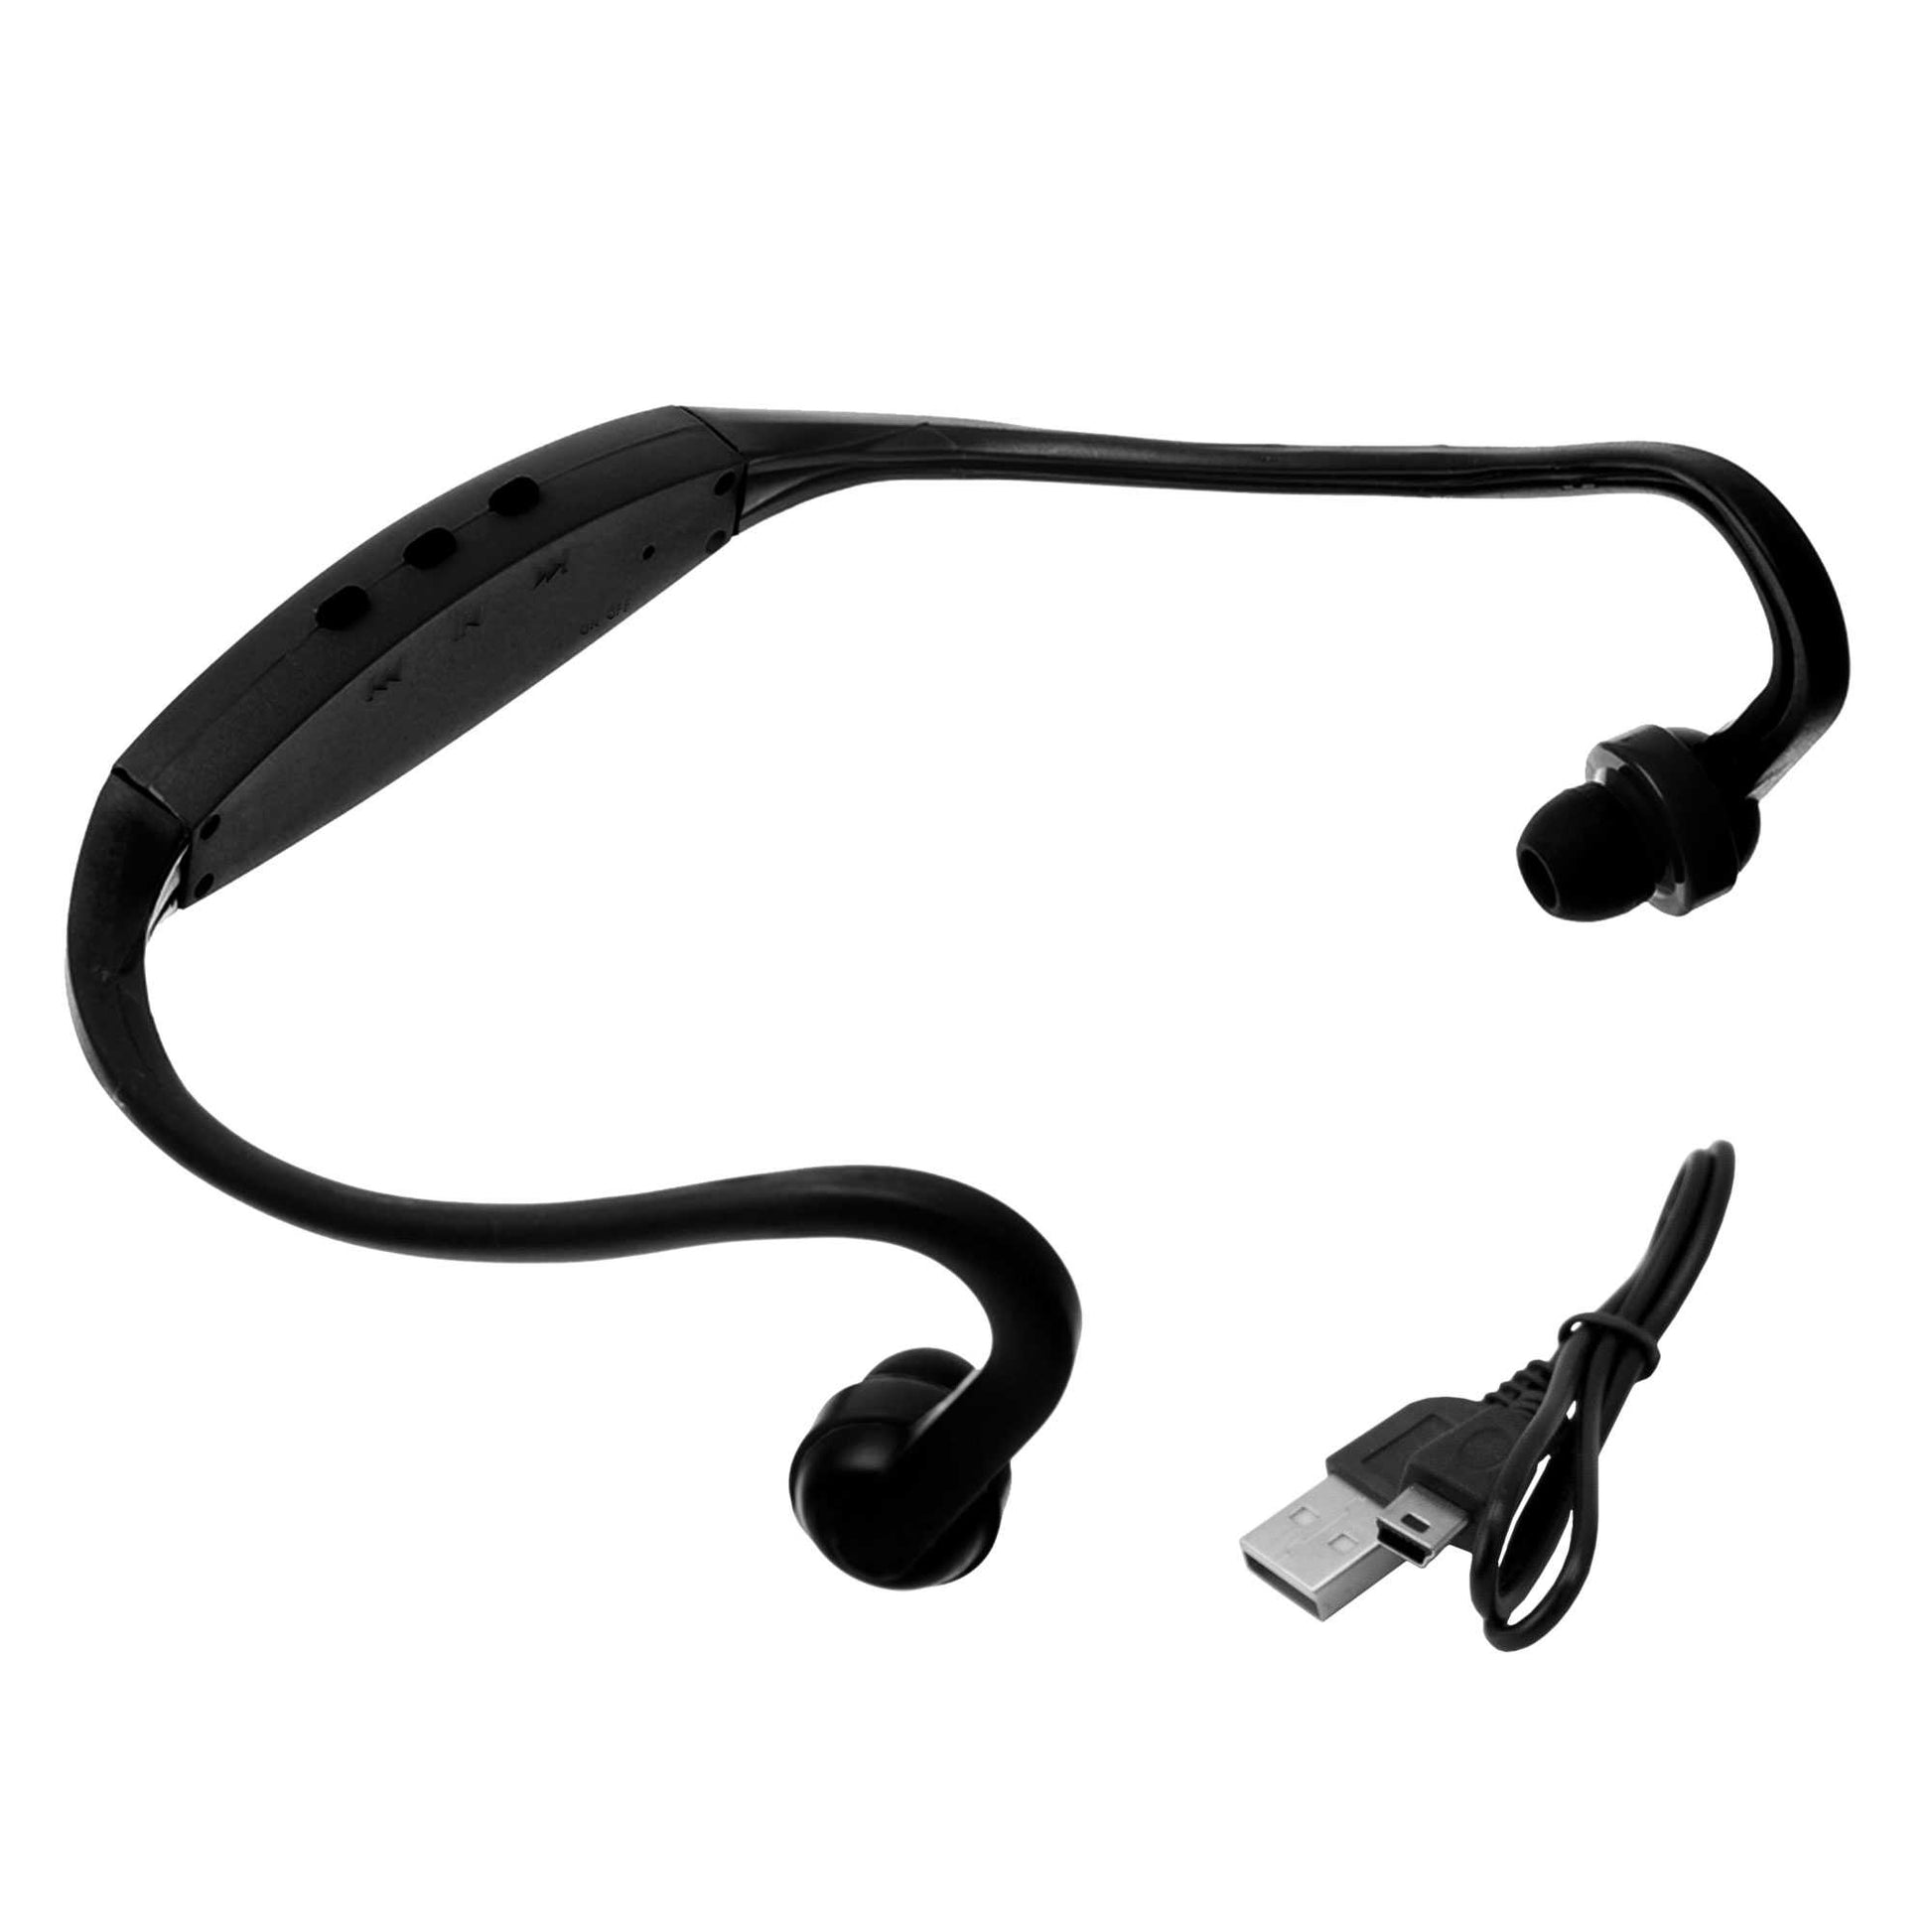 Auriculares Reproductor Bluetooth/MP3/Radio Deportivos Sin Cables Micro SD USB Sport Negro